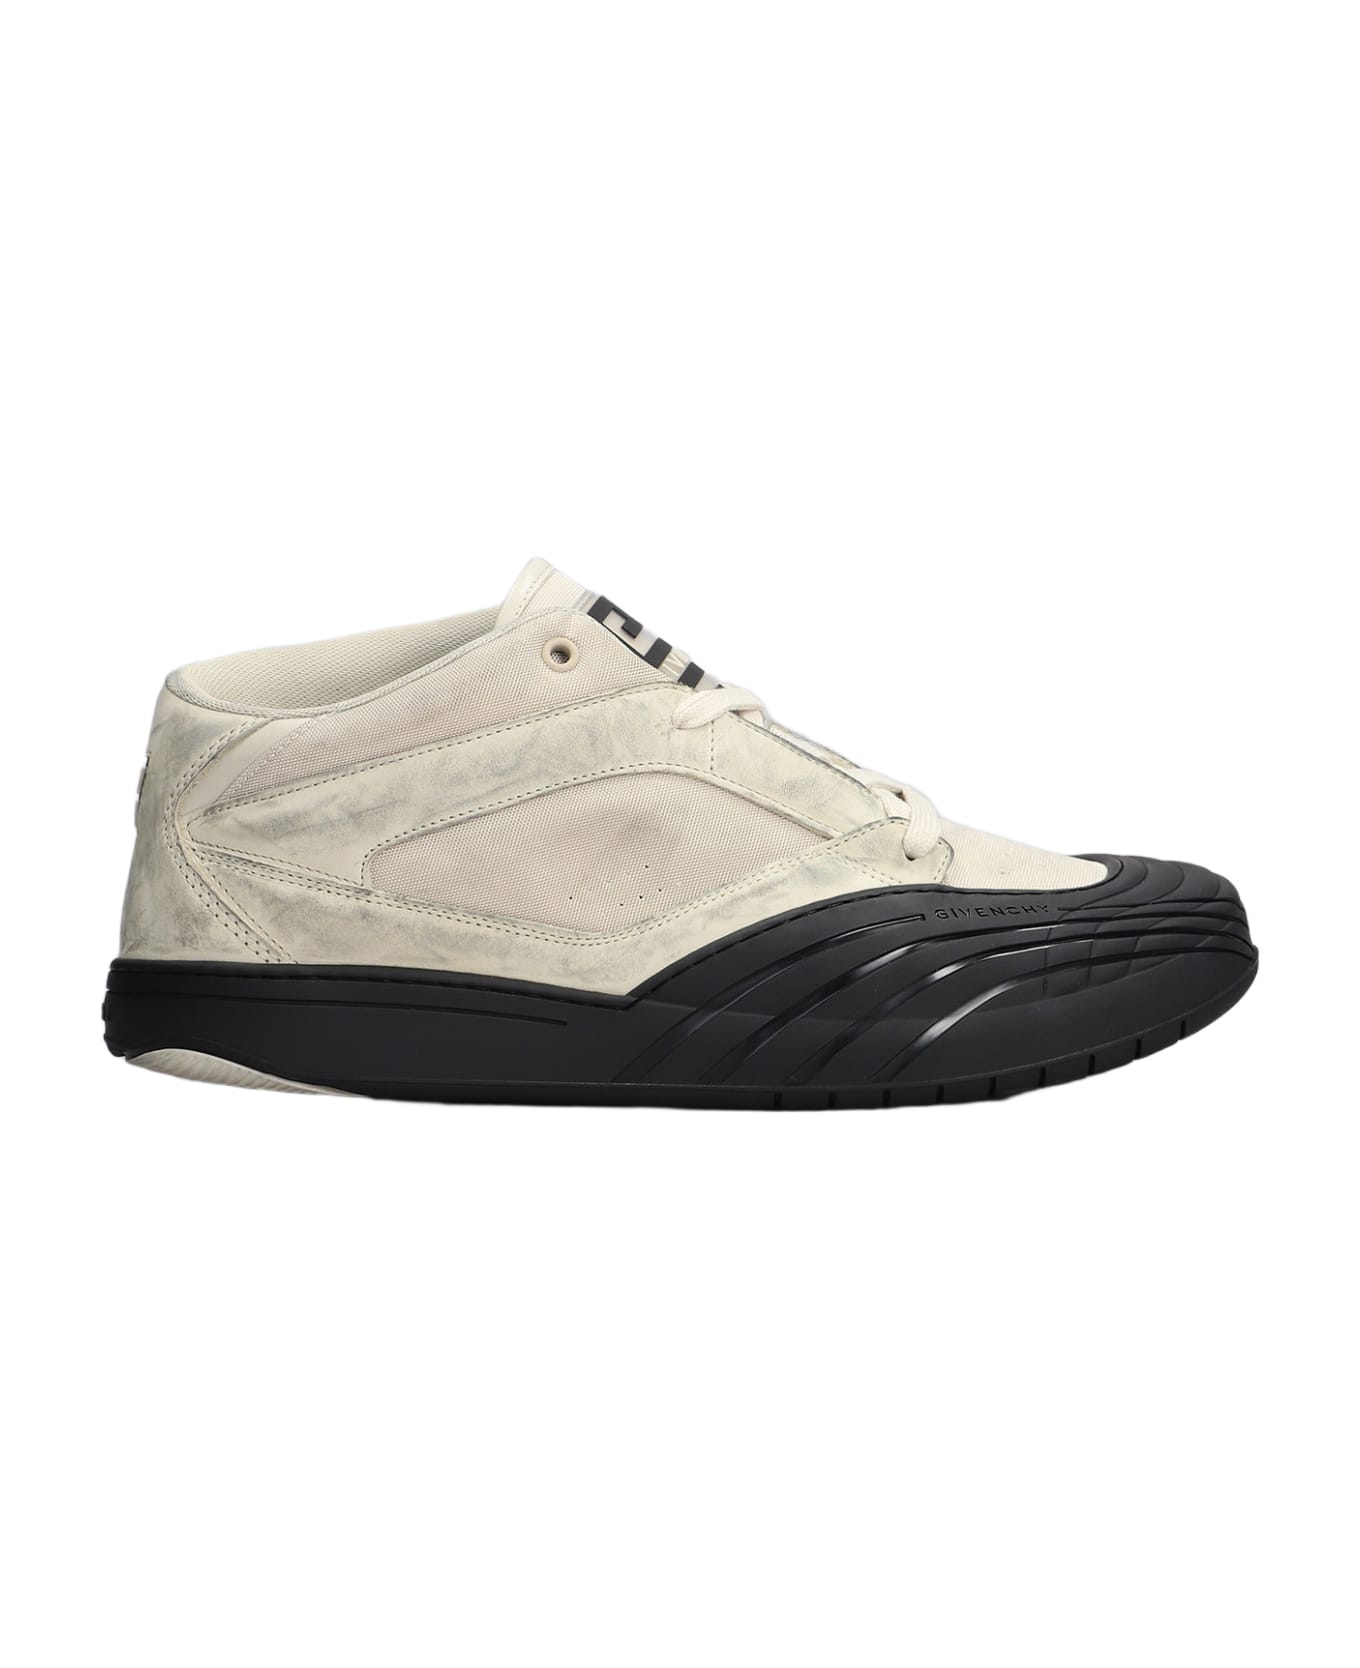 Givenchy Sneakers In Beige Leather - beige